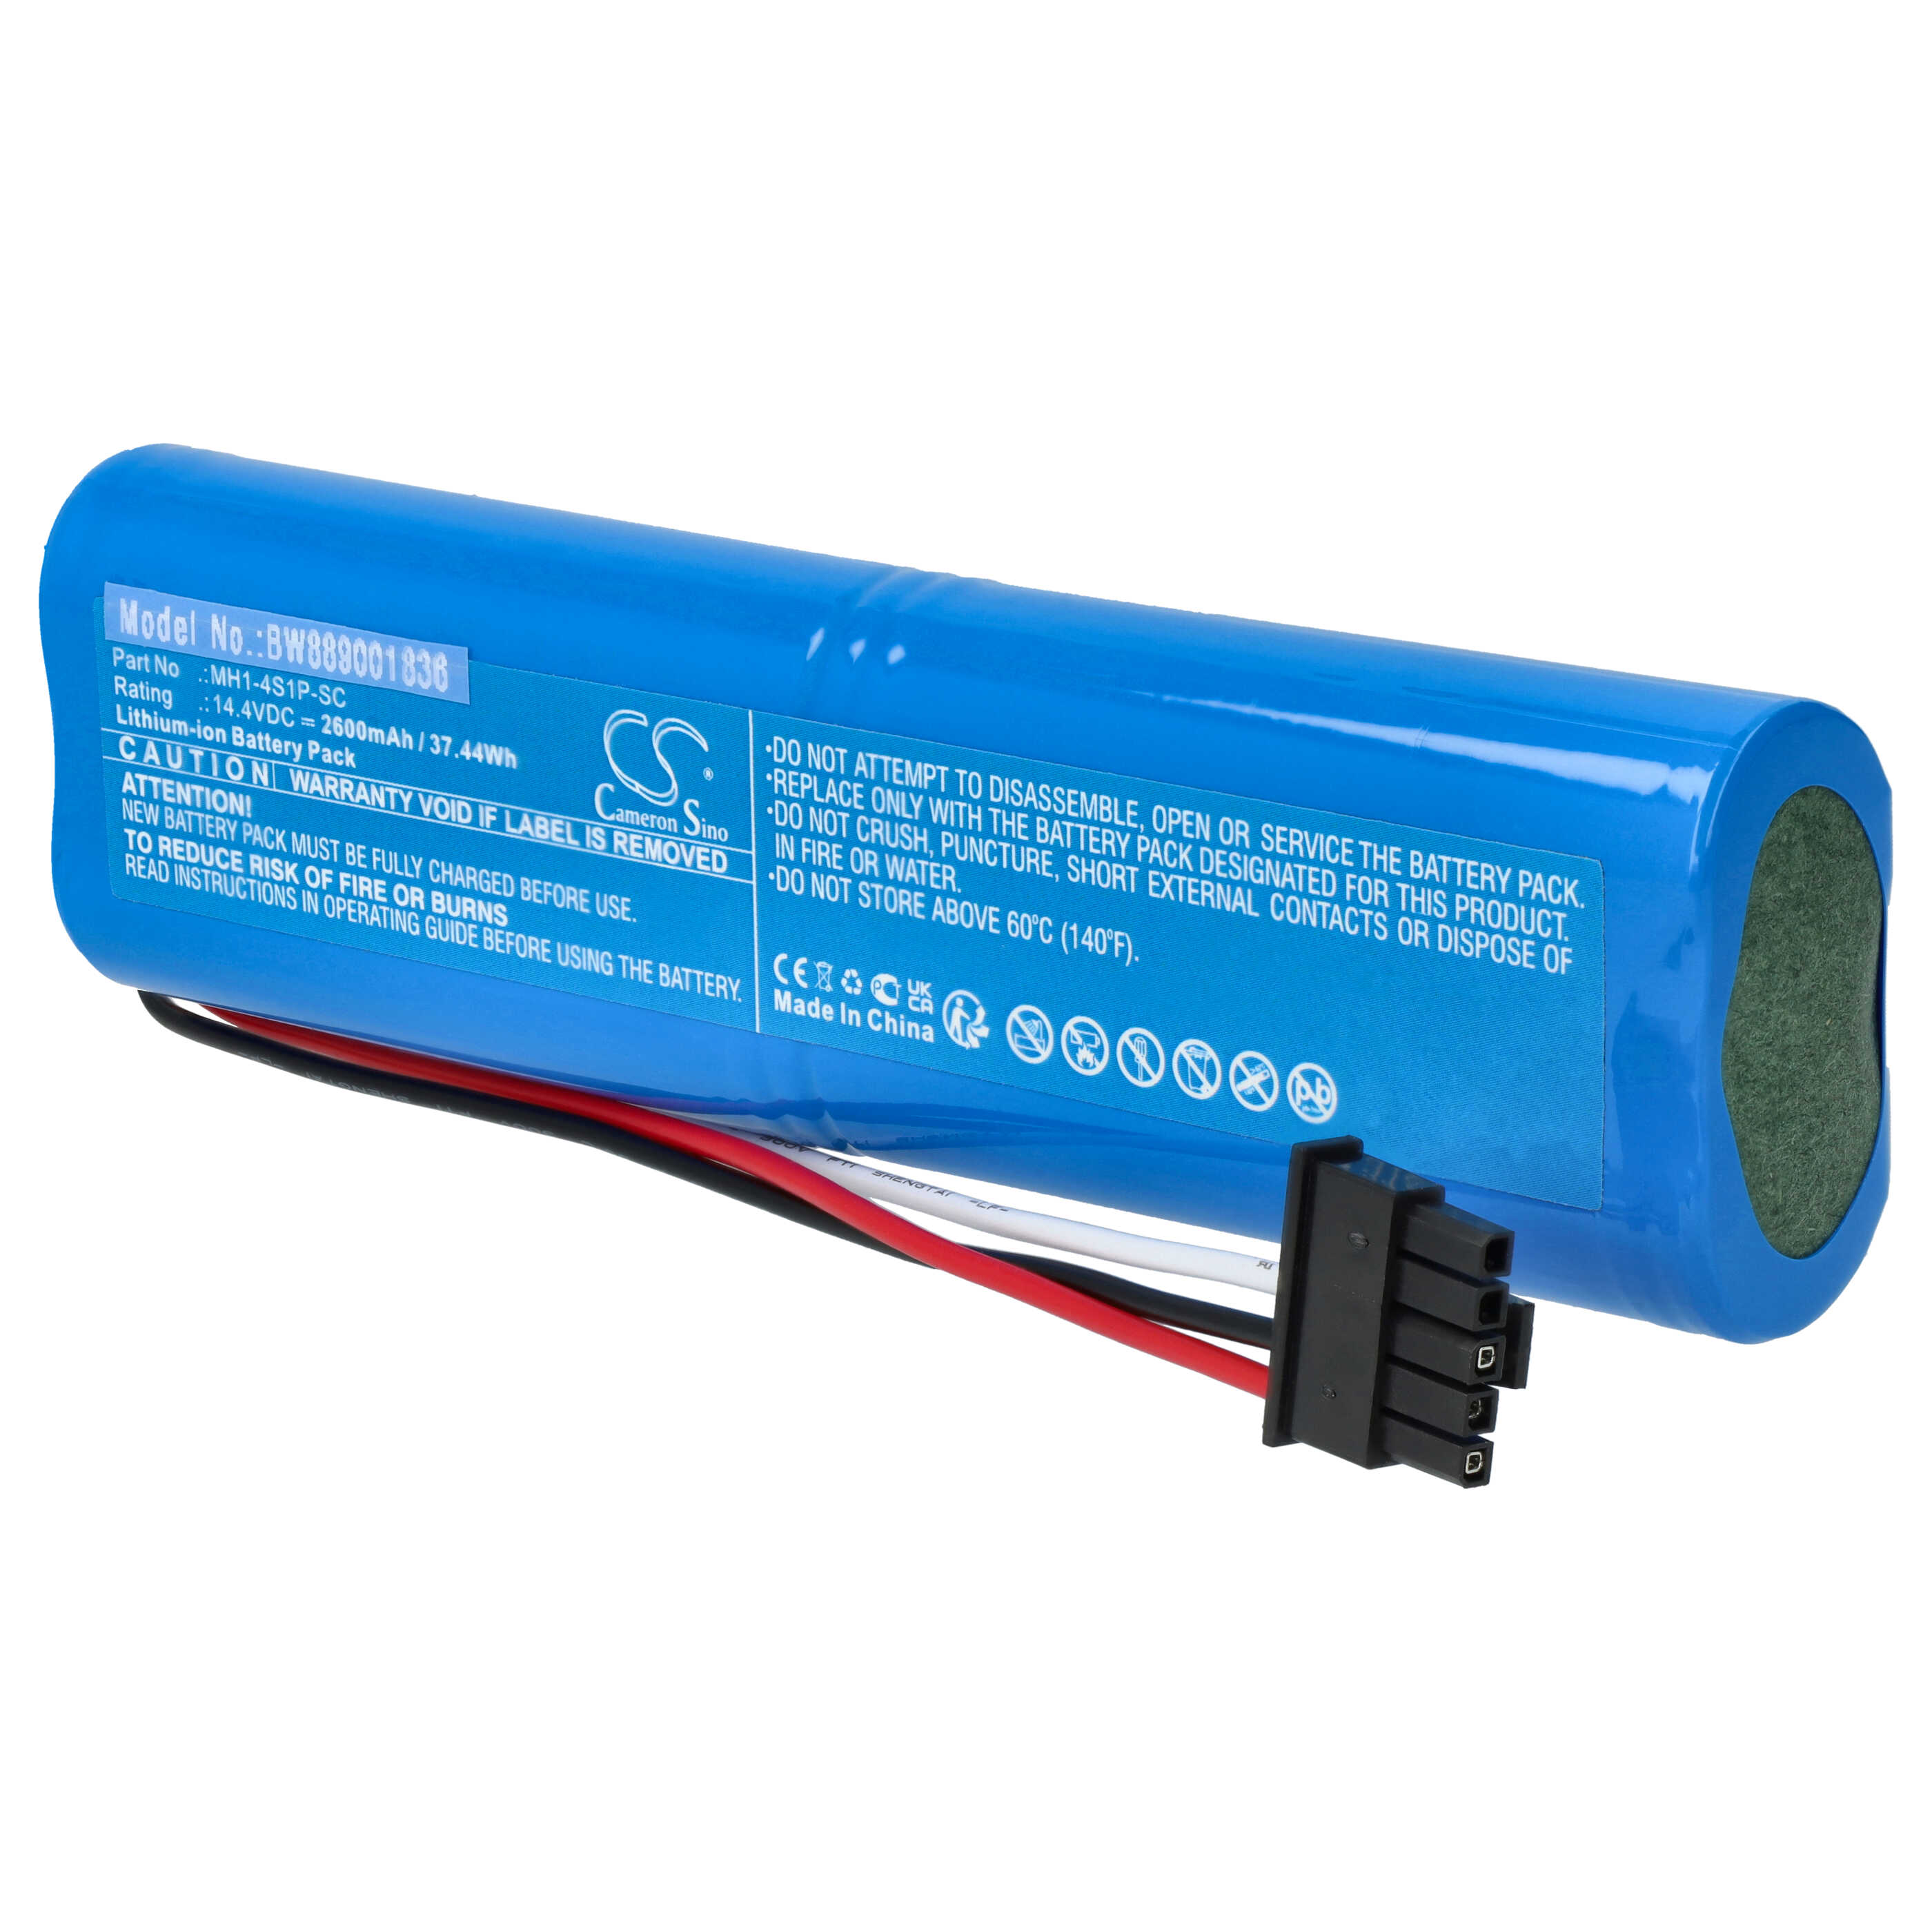 Battery Replacement for Haier MH1-4S1P-SC for - 2600mAh, 14.4V, Li-Ion